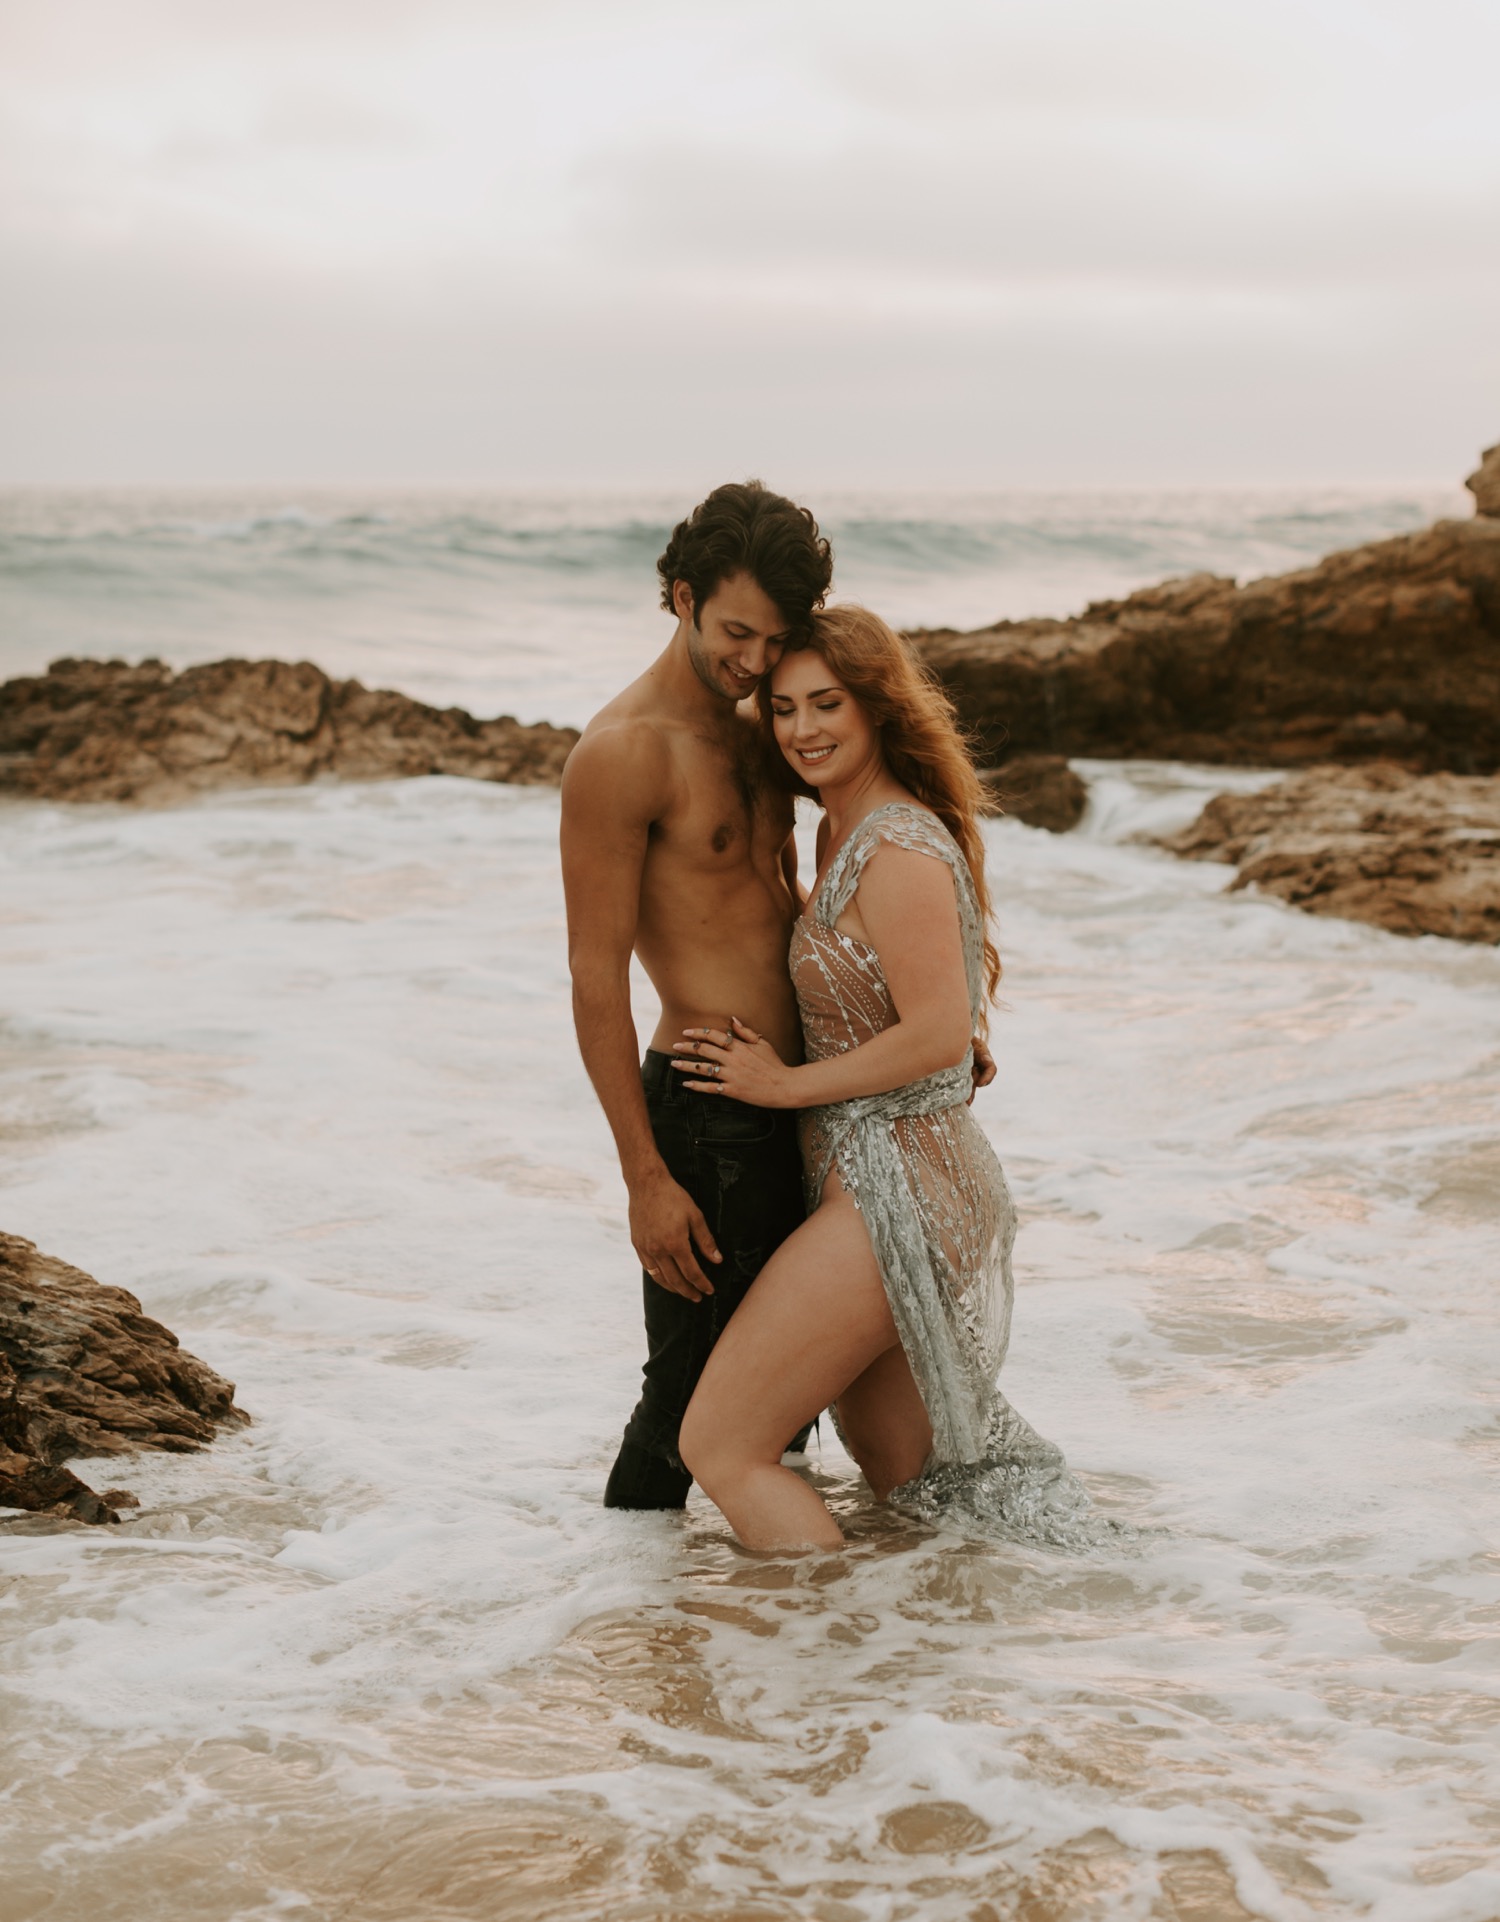 Beach photo poses for couples || couple beach poses for Photoshoot 2022 -  YouTube